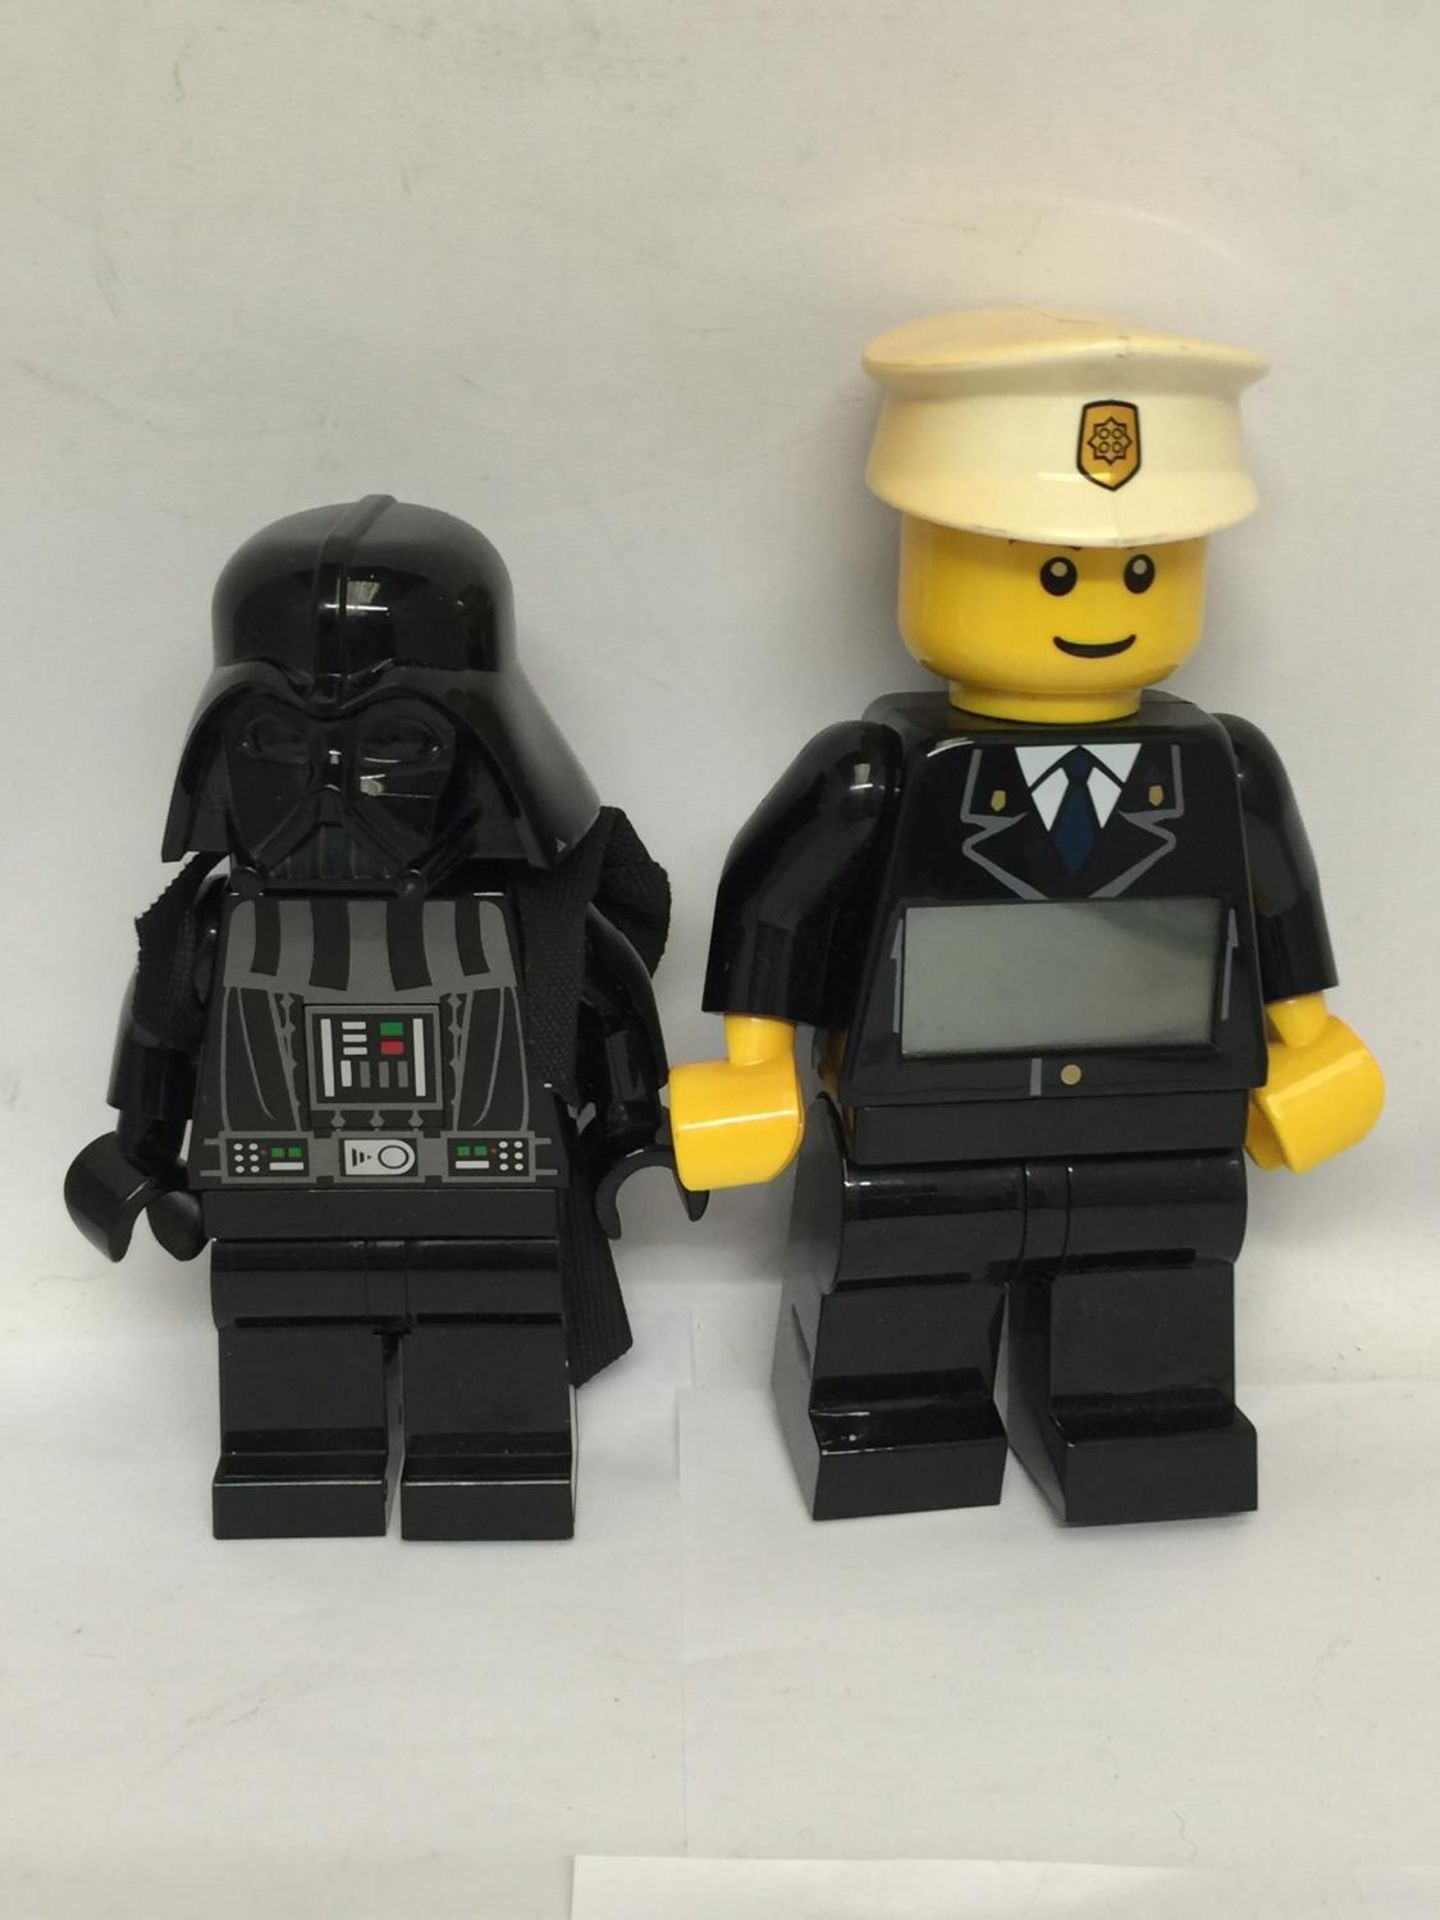 TWO LARGE LEGO MINI-FIGURE BATTERY OPERATED DIGITAL TOYS - A DARTH VADER TORCH AND A POLICEMAN ALARM